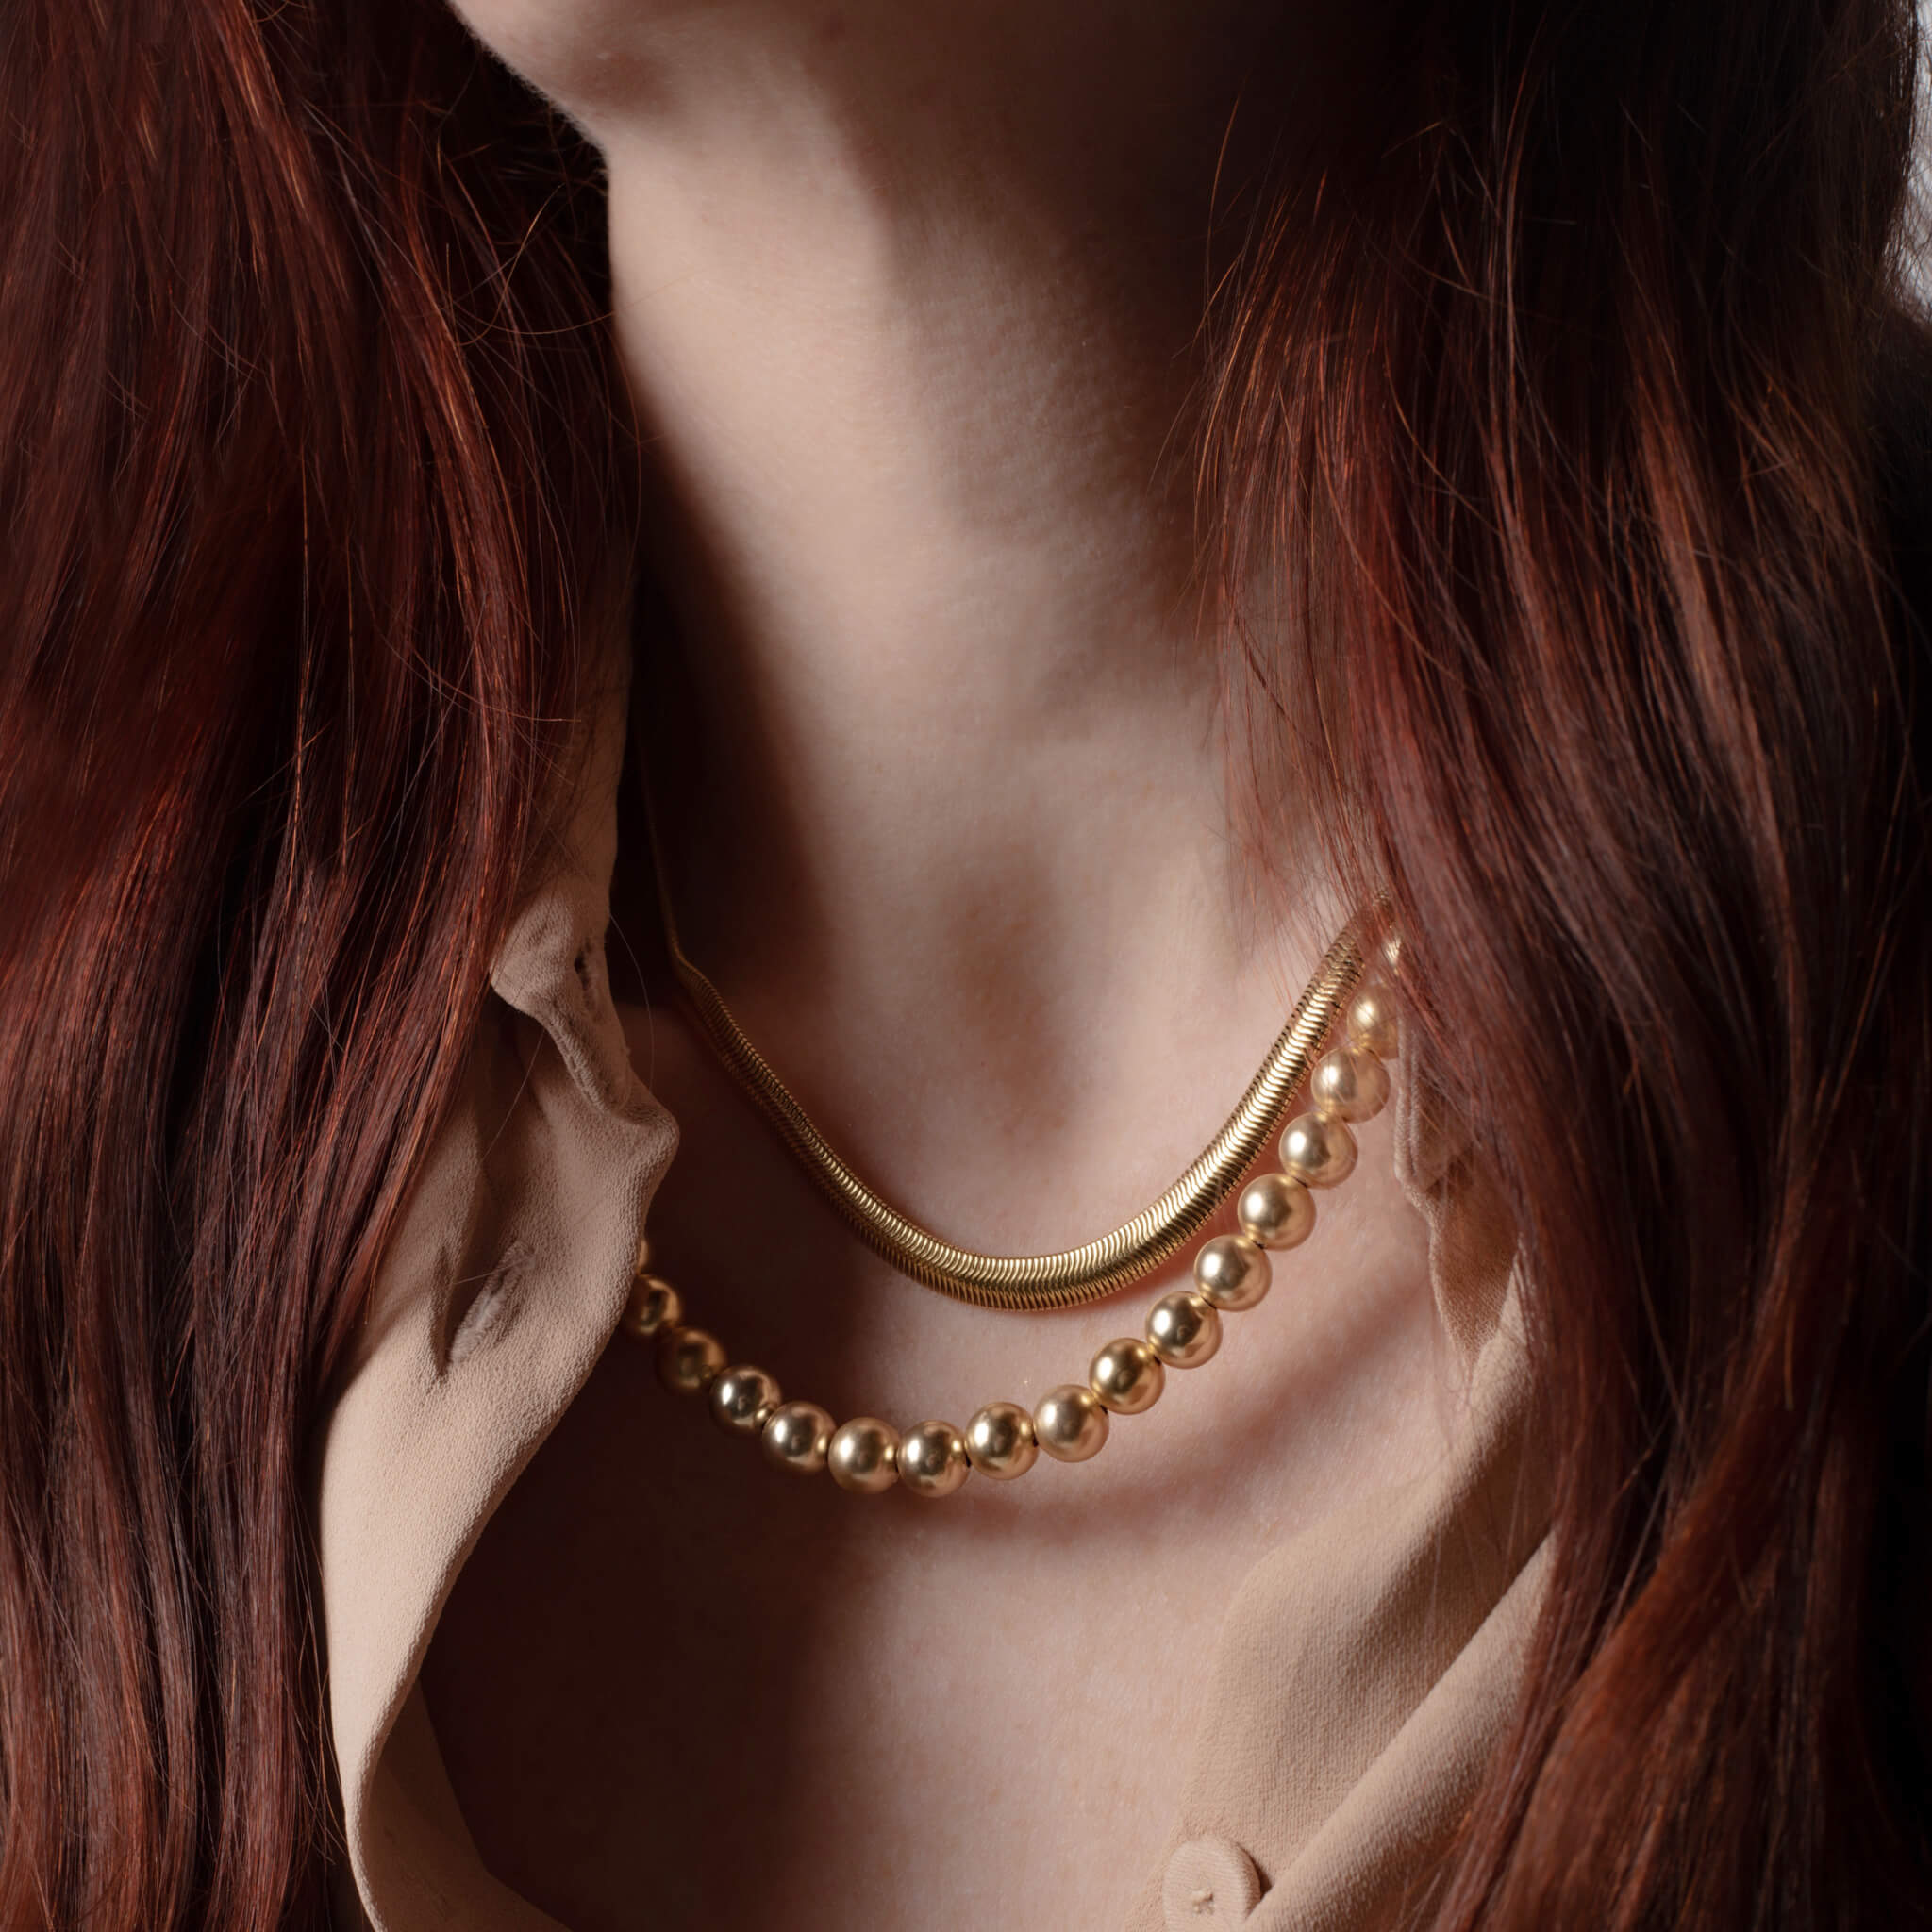 Add-a-Pearl Necklace: Learn why this is THE BEST gift for girls